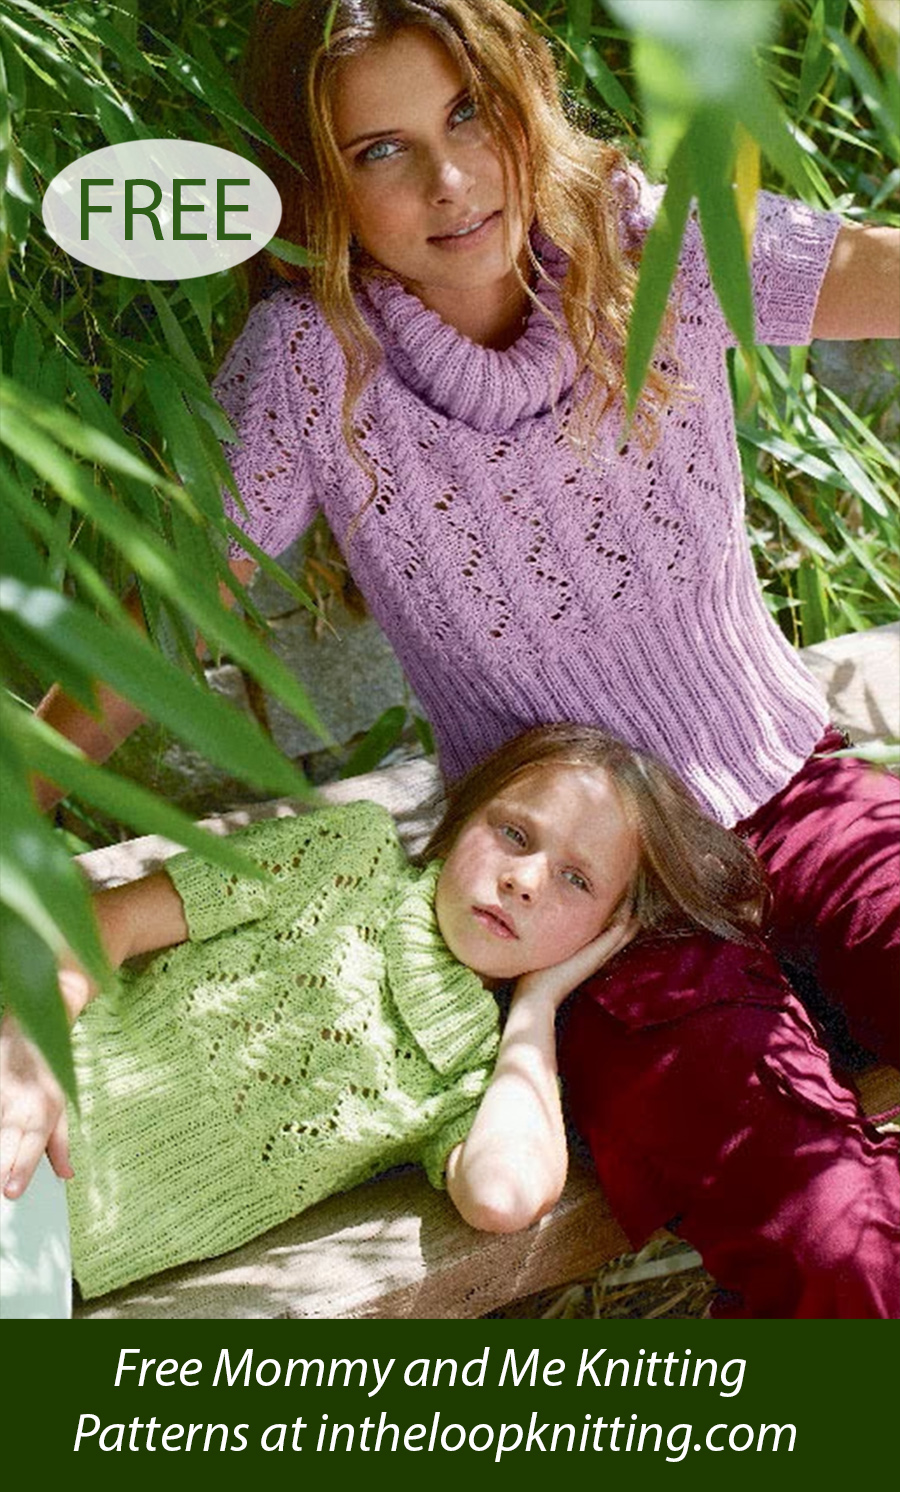 Free Ladies and Girl's Top with Roll-Neck Knitting Pattern